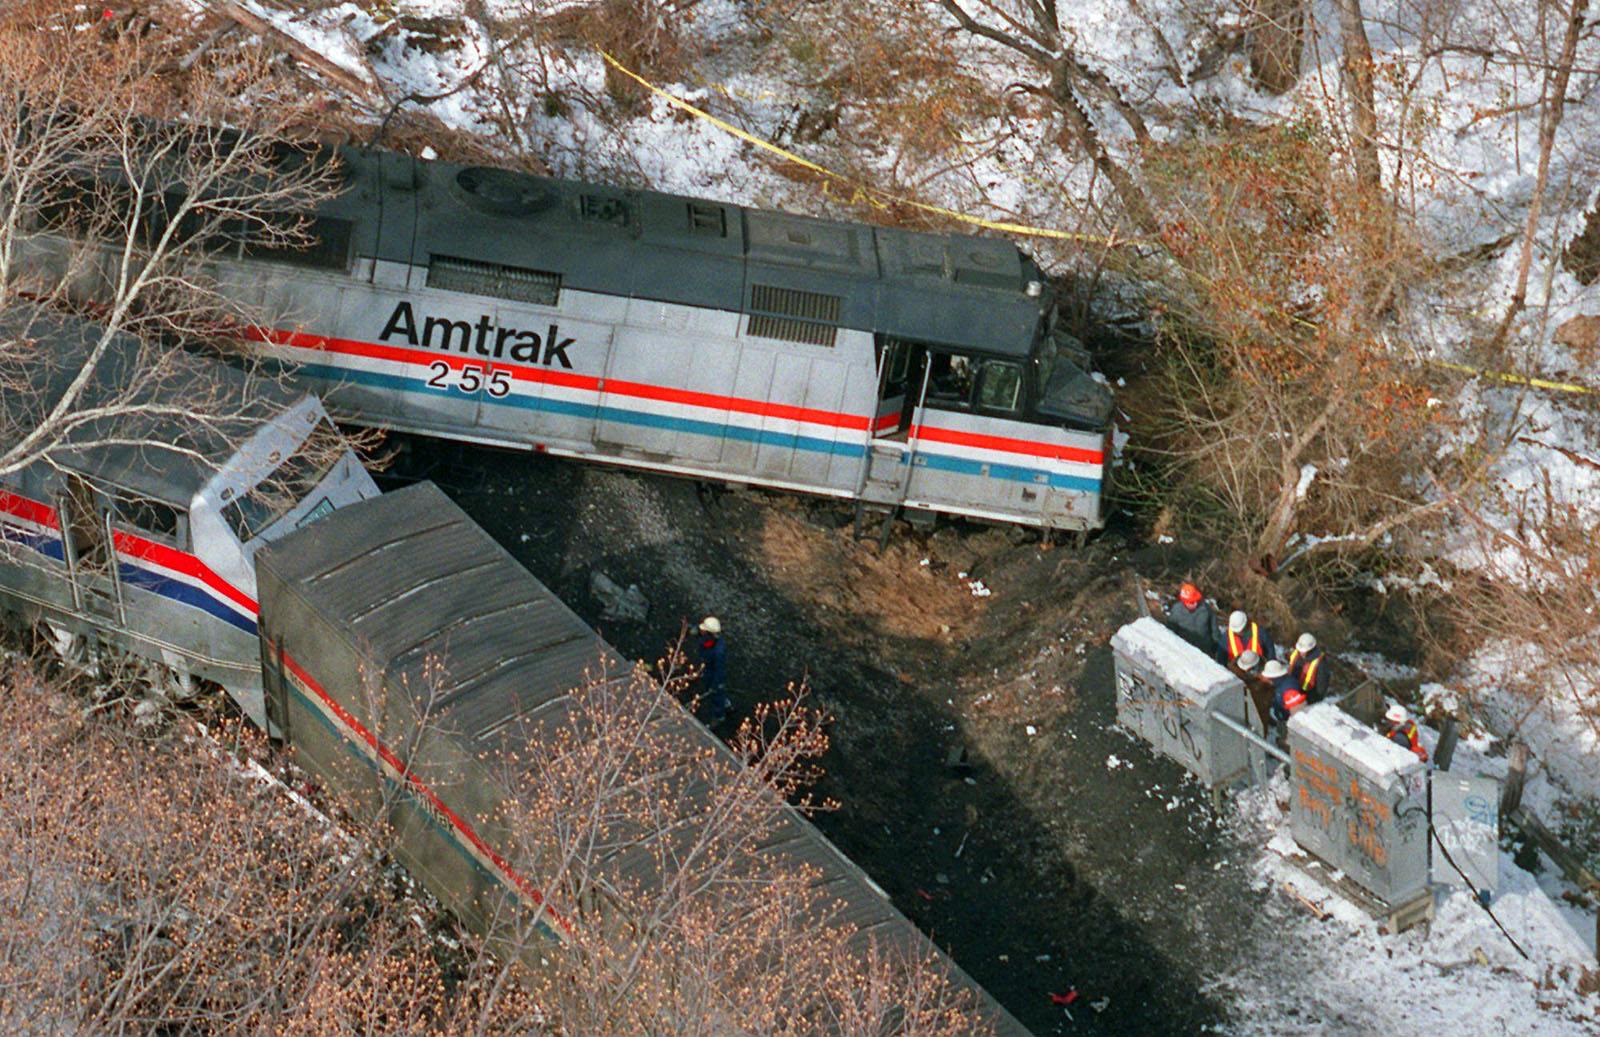 The Amtrak locomotive that hit a MARC commuter train Friday night, killing at least 11 people, is seen in this aerial view Saturday, Feb. 17, 1996 in Silver Spring, Md. At right, workers inspect signal switching equipment. (AP Photo/Doug Mills)